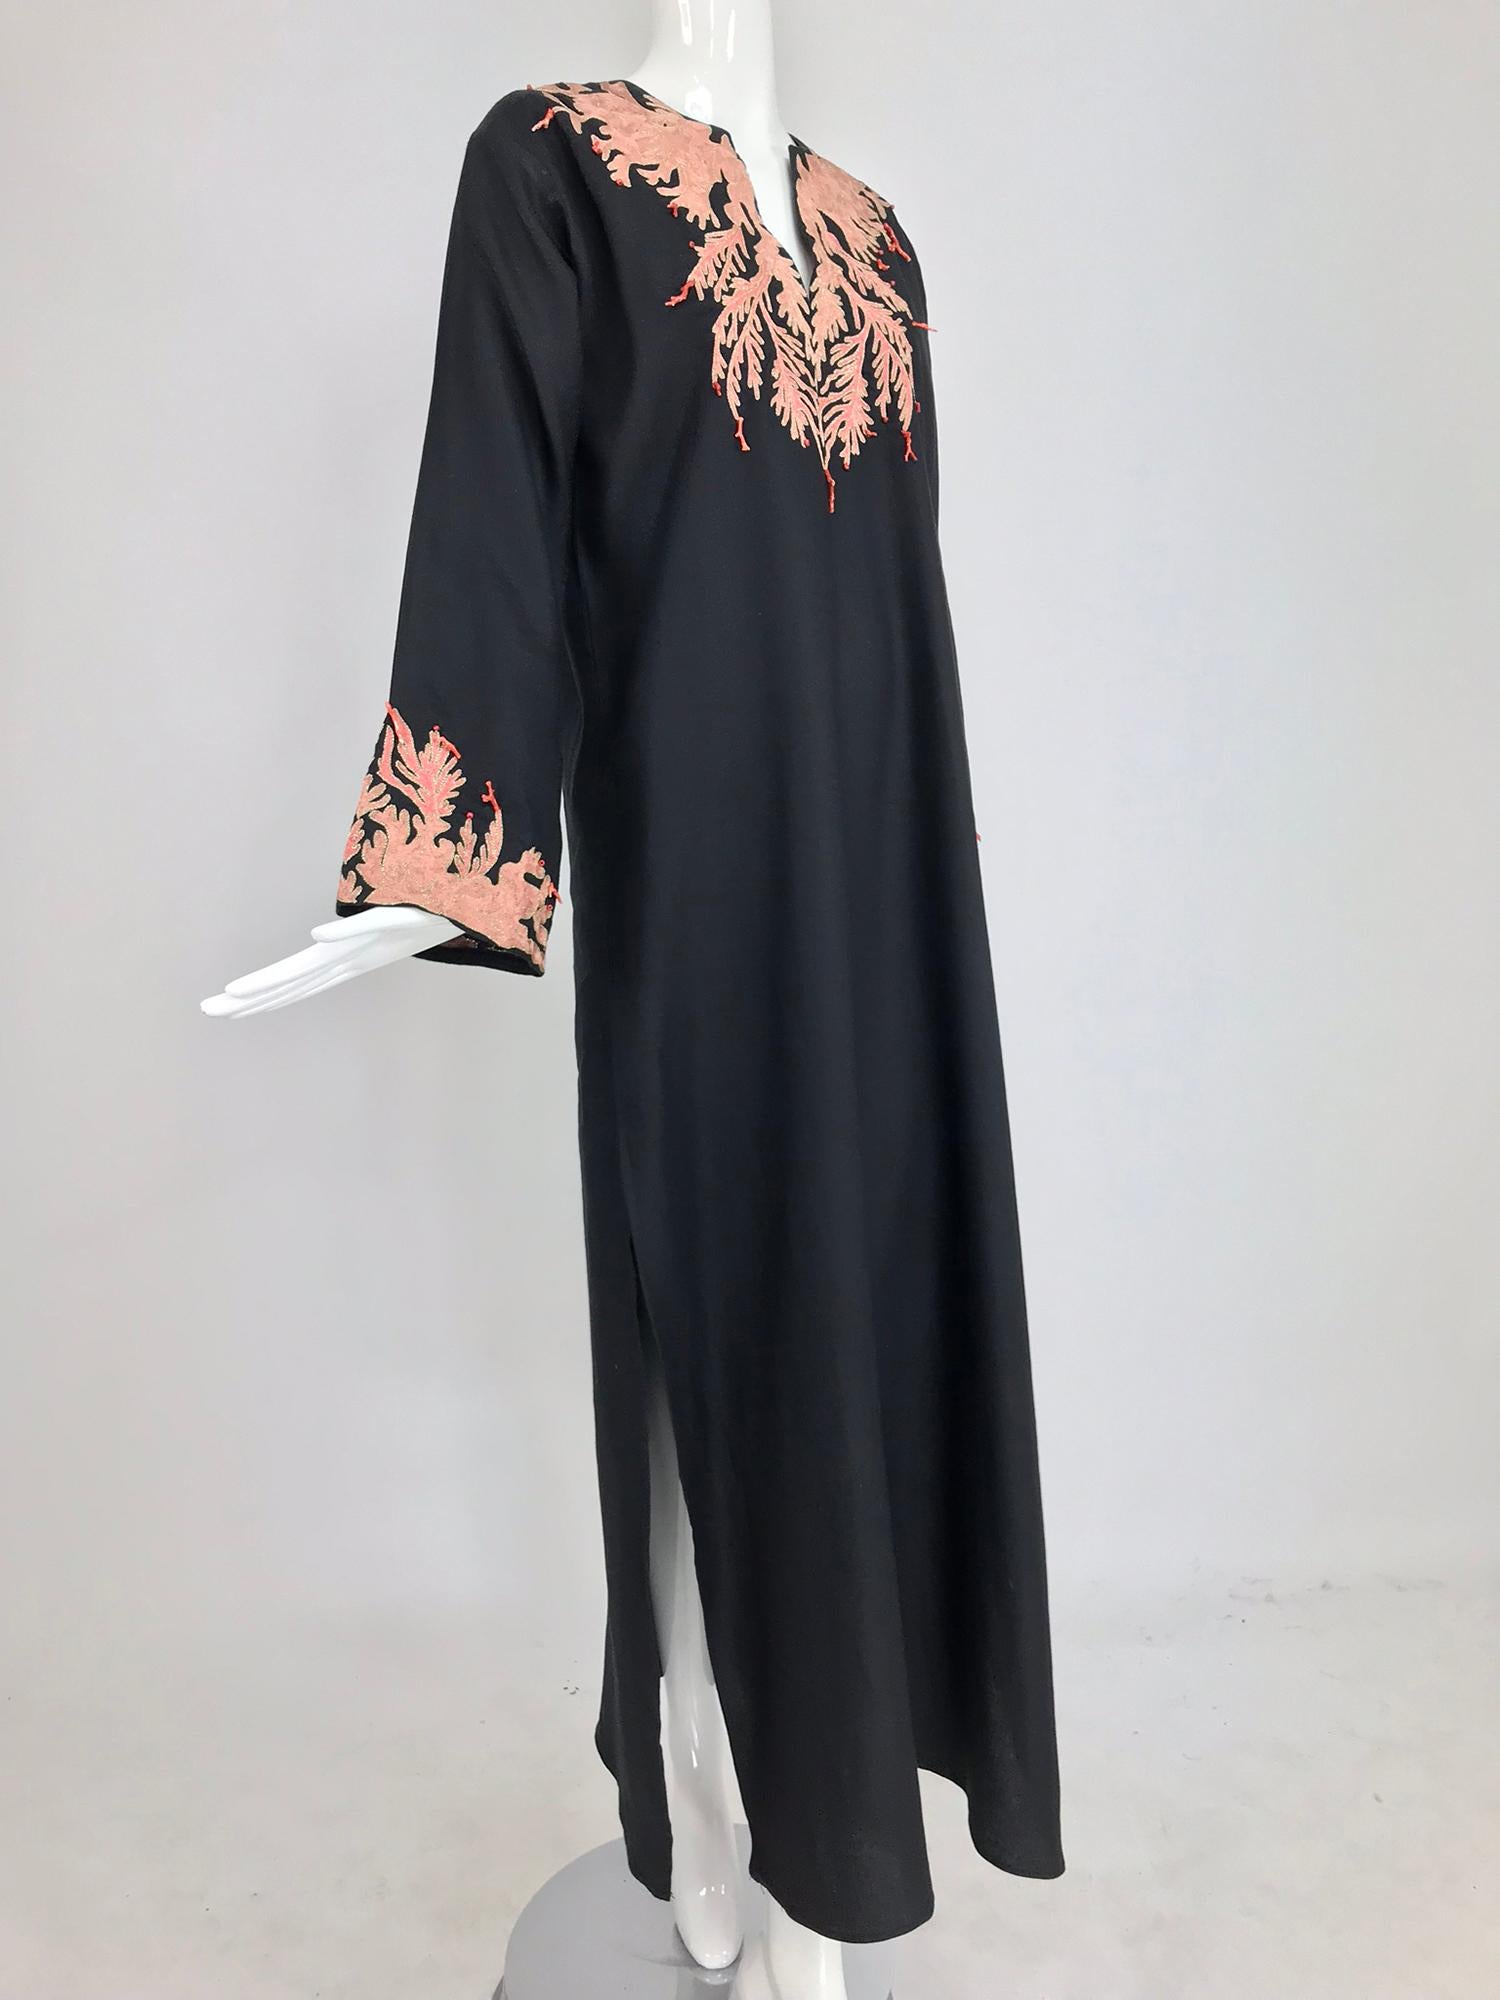 Jeannie McQueeny coral embroidered black linen caftan. Jeannie McQueeny caftans are a treasure to find, as no one lets them go and they are done in limited editions. This black linen caftan is particularly special as the bold colour combination is